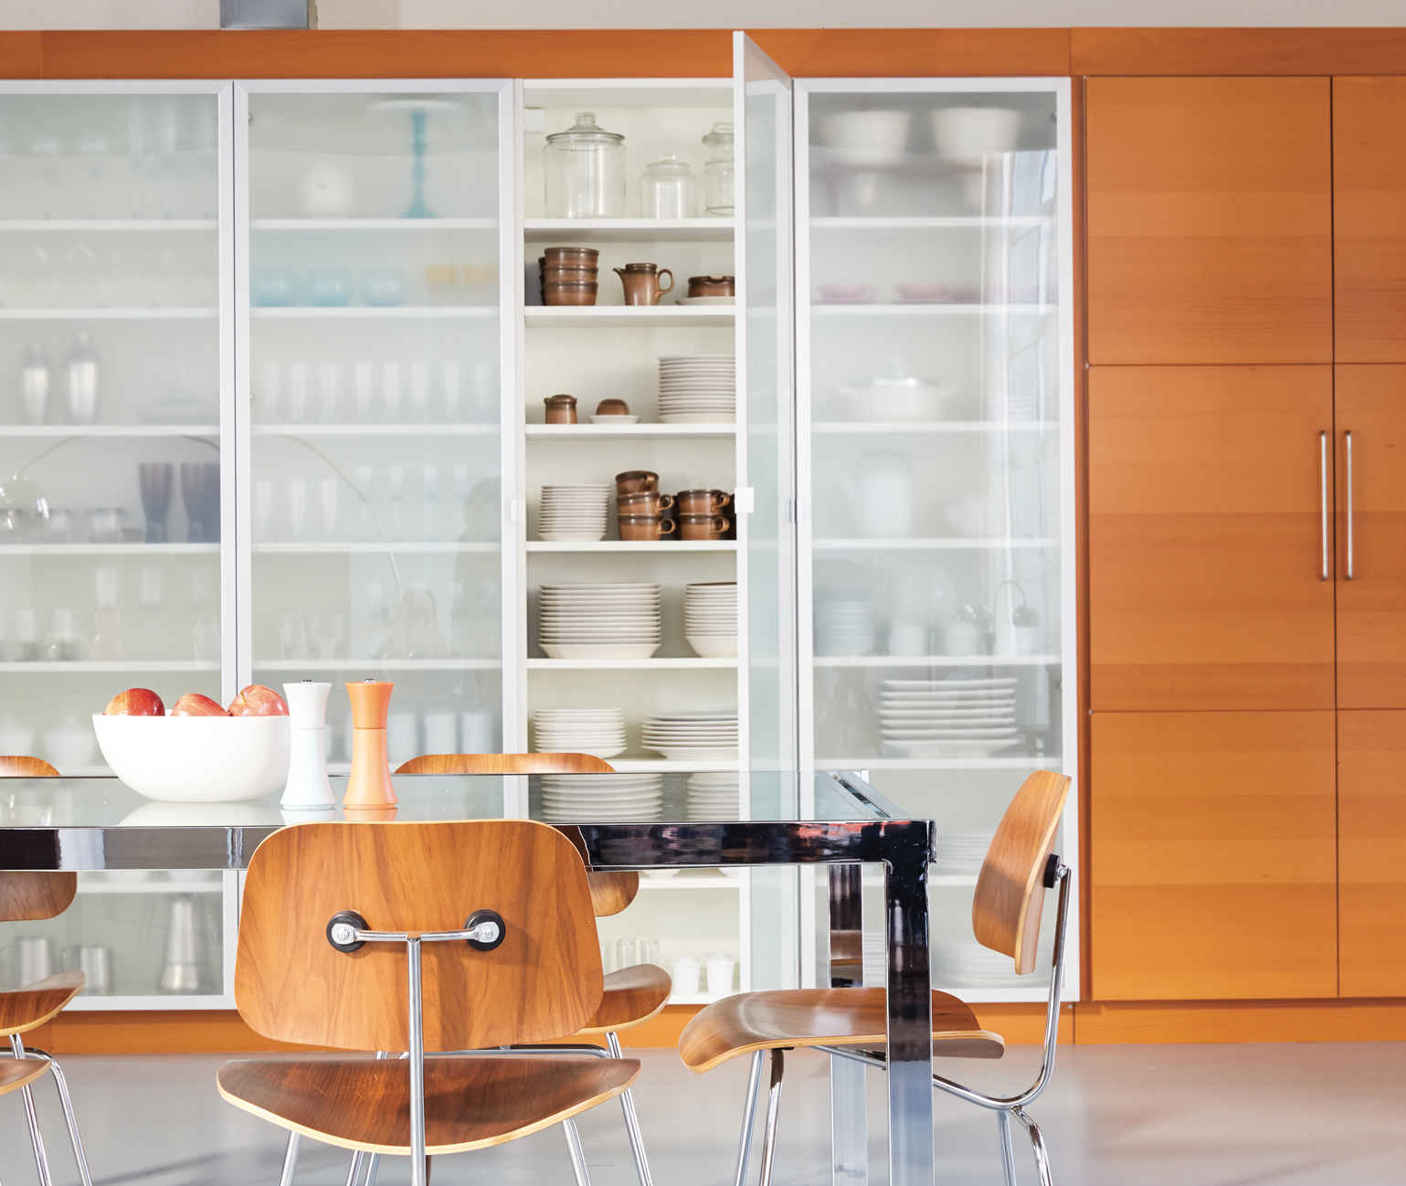 STORAGE AS ART. This bank of wardrobes provides an amazing amount of storage, but that’s only half the story. Lisa created an art-installation-like backdrop to her dining area by keeping like-size items together and not over-packing the shelves.